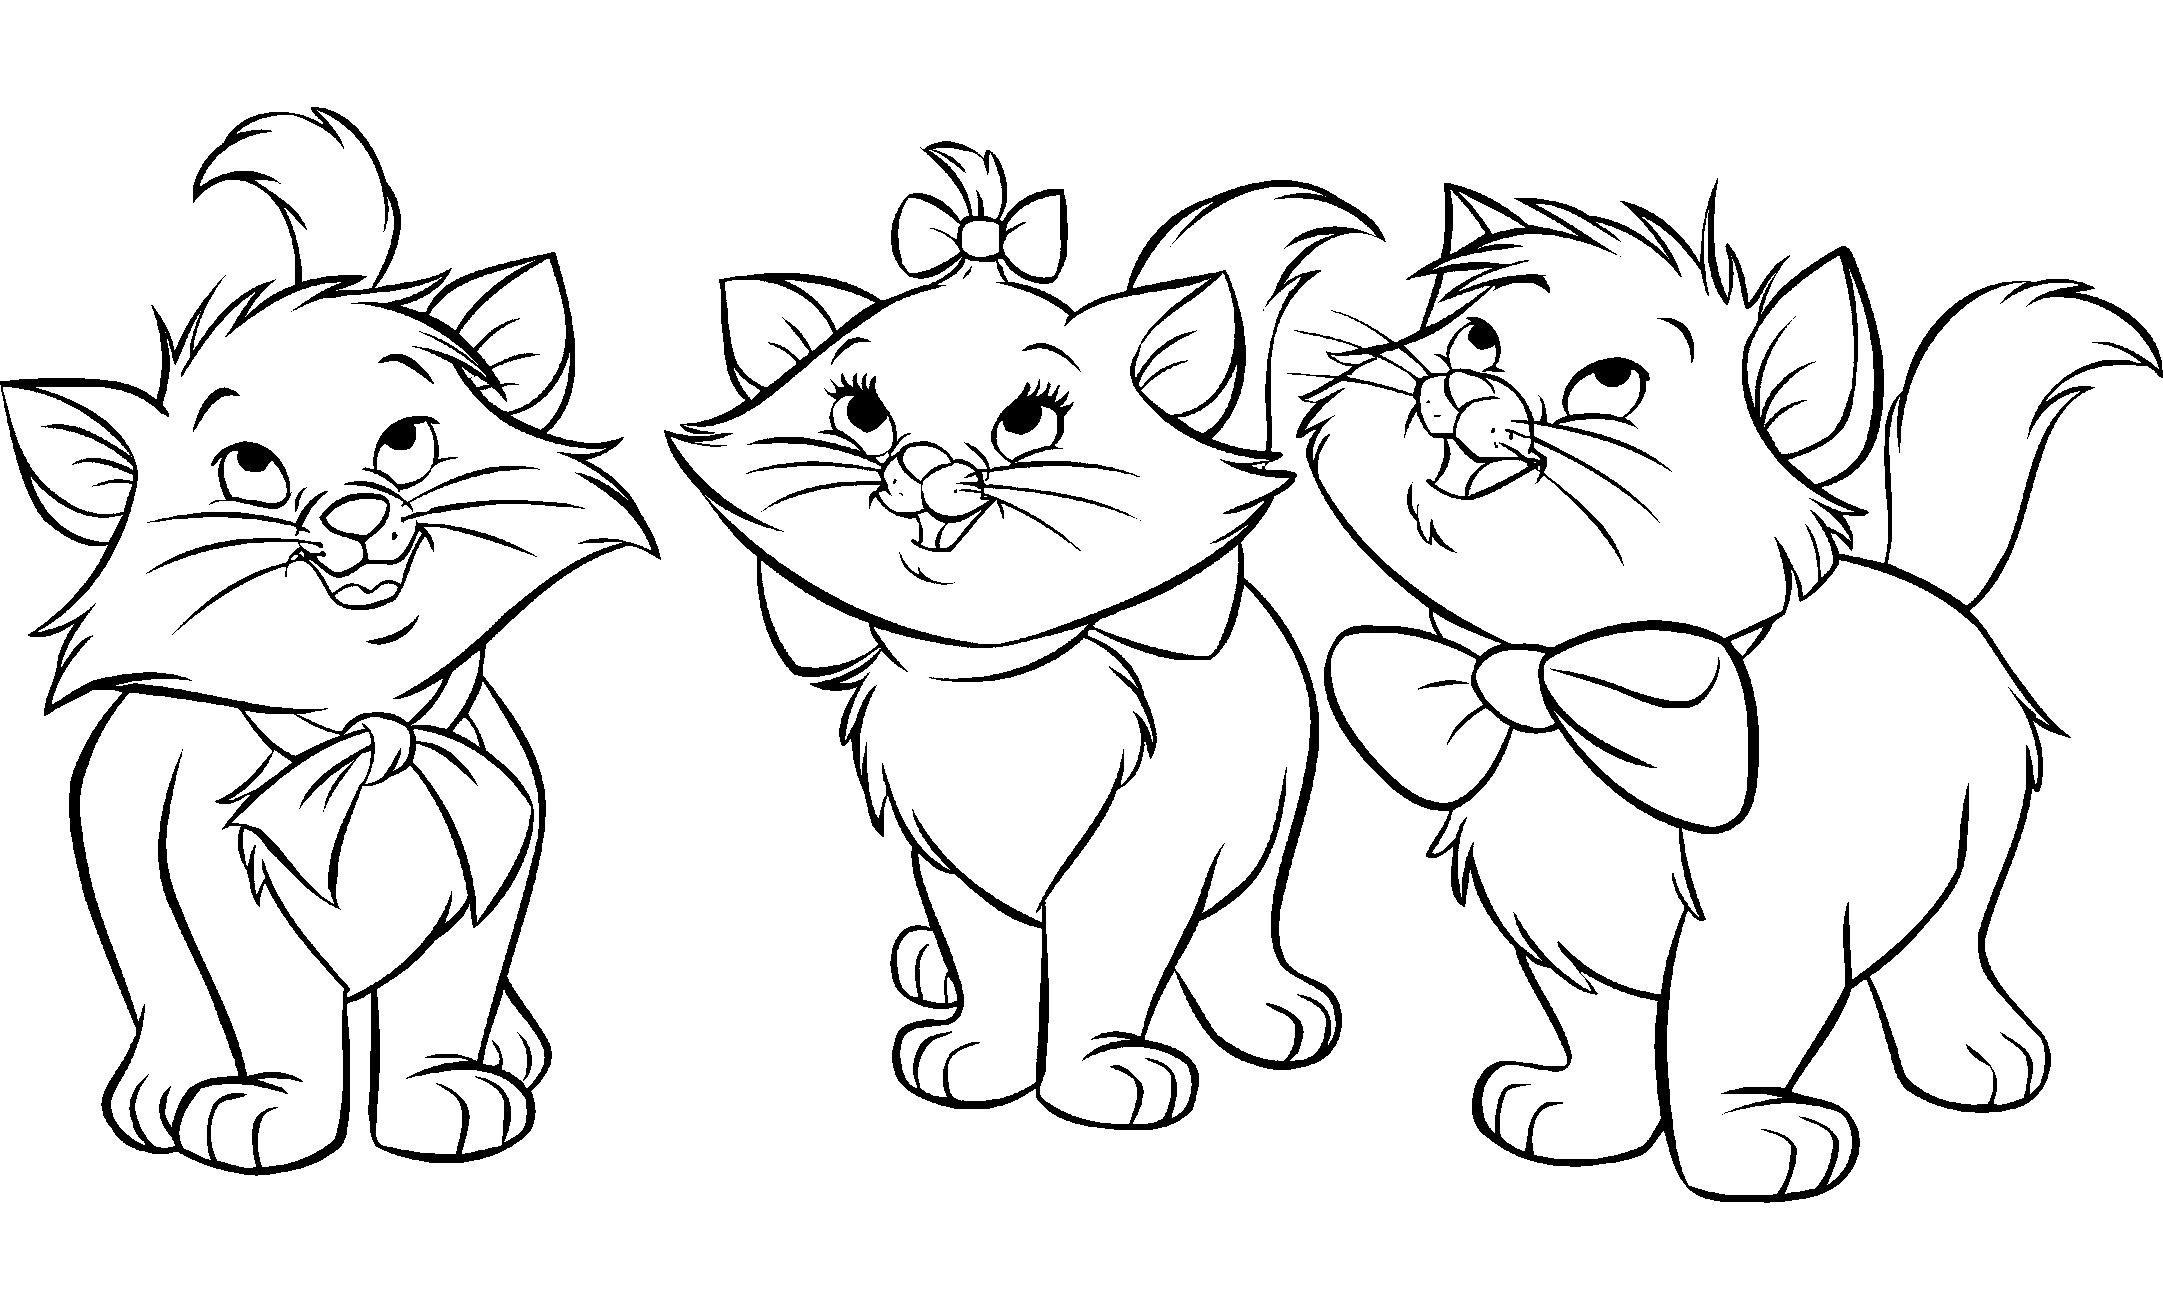 Little Aristocats coloring page